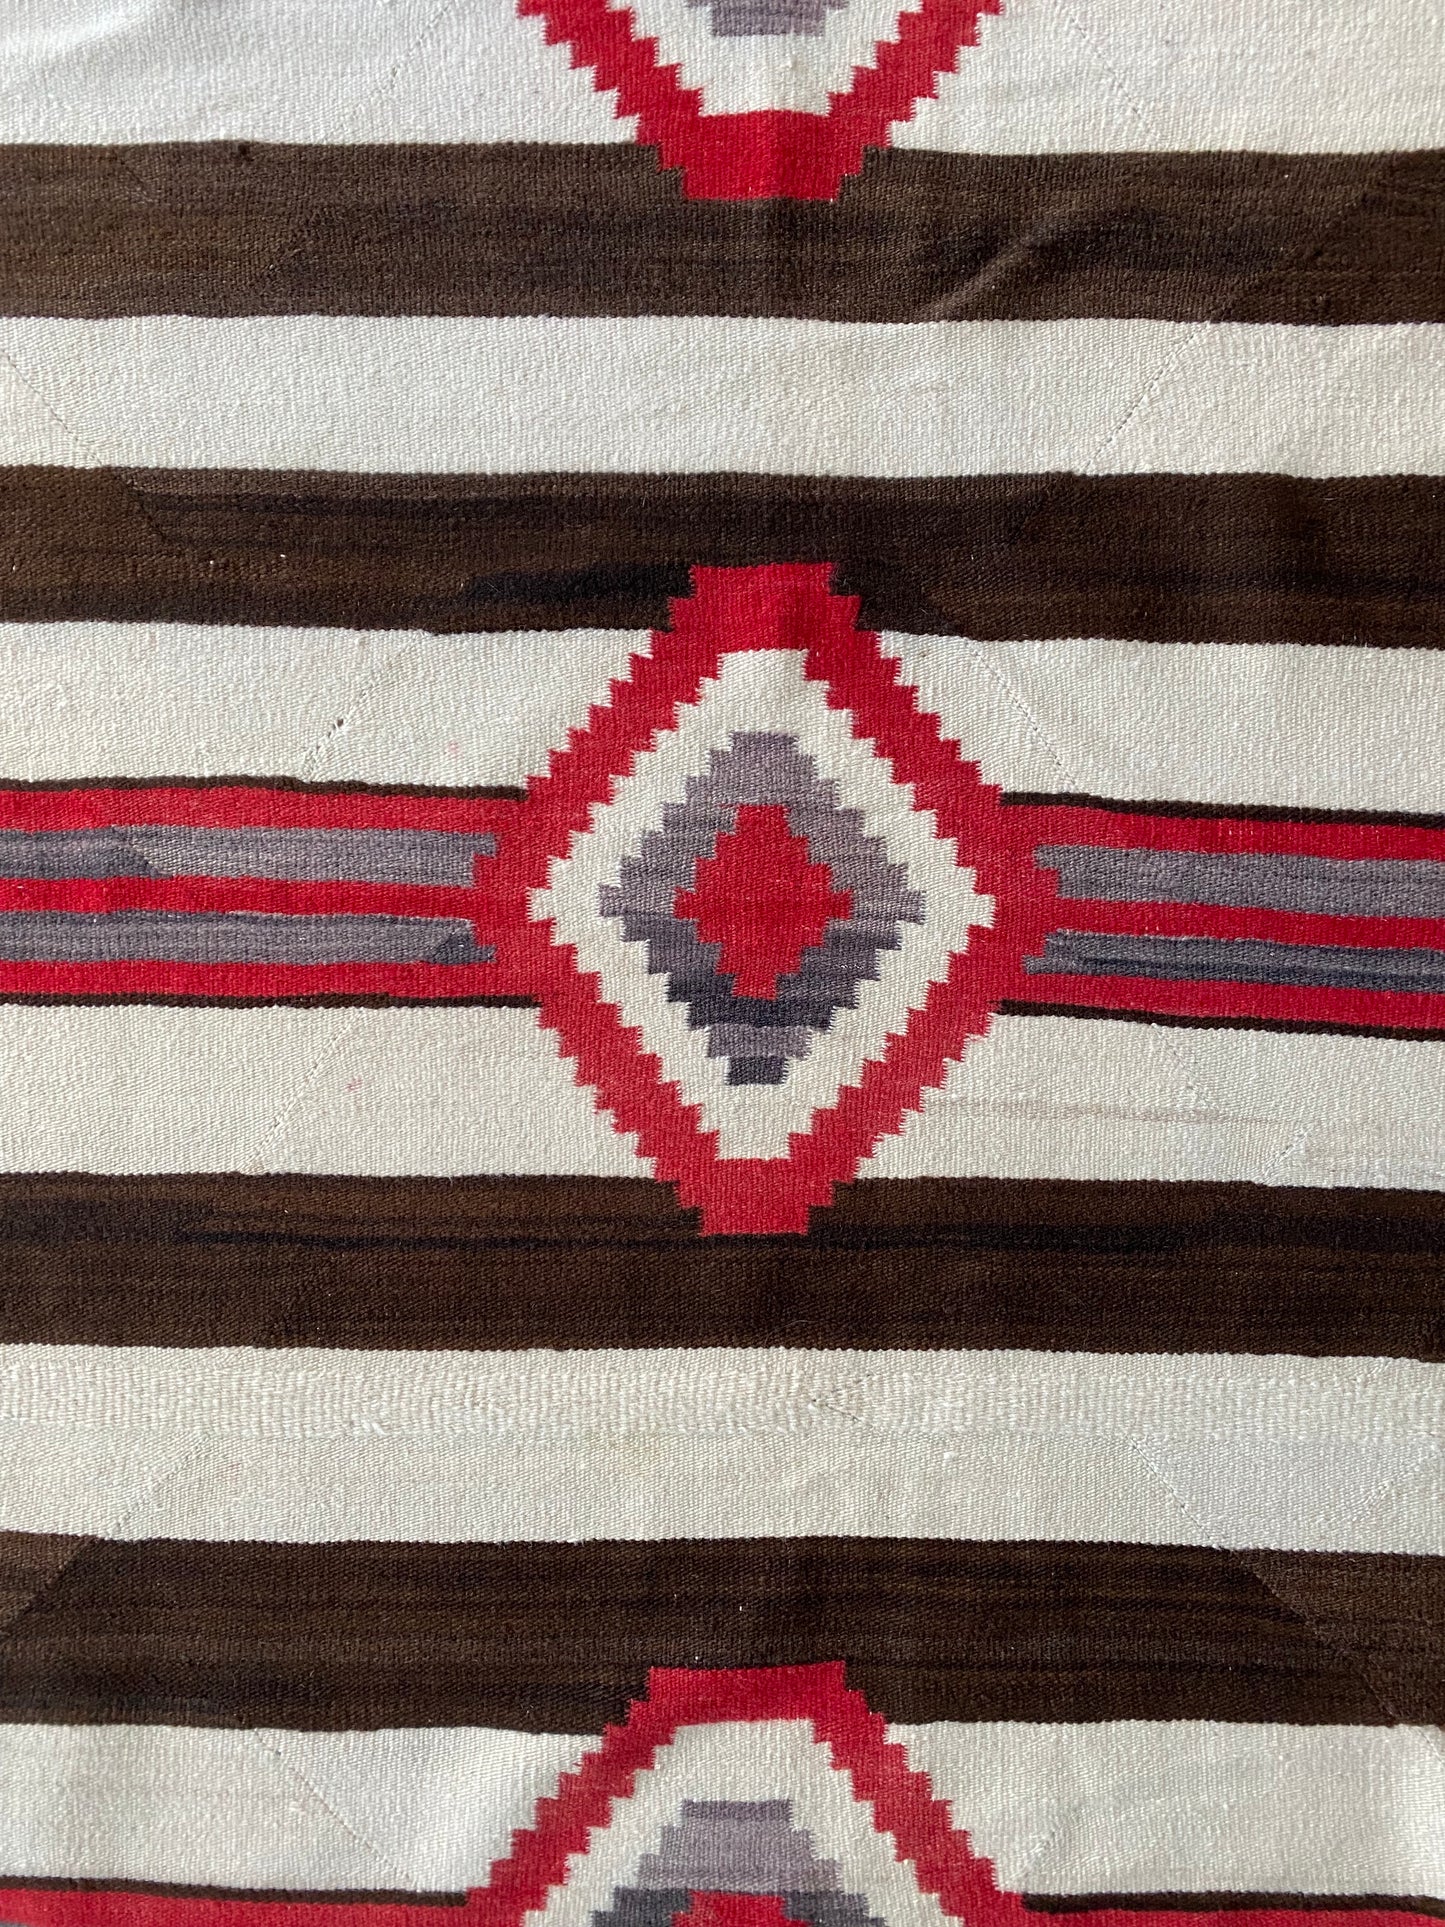 Antique 3rd Phase Chief's Blanket - 65" x 53"